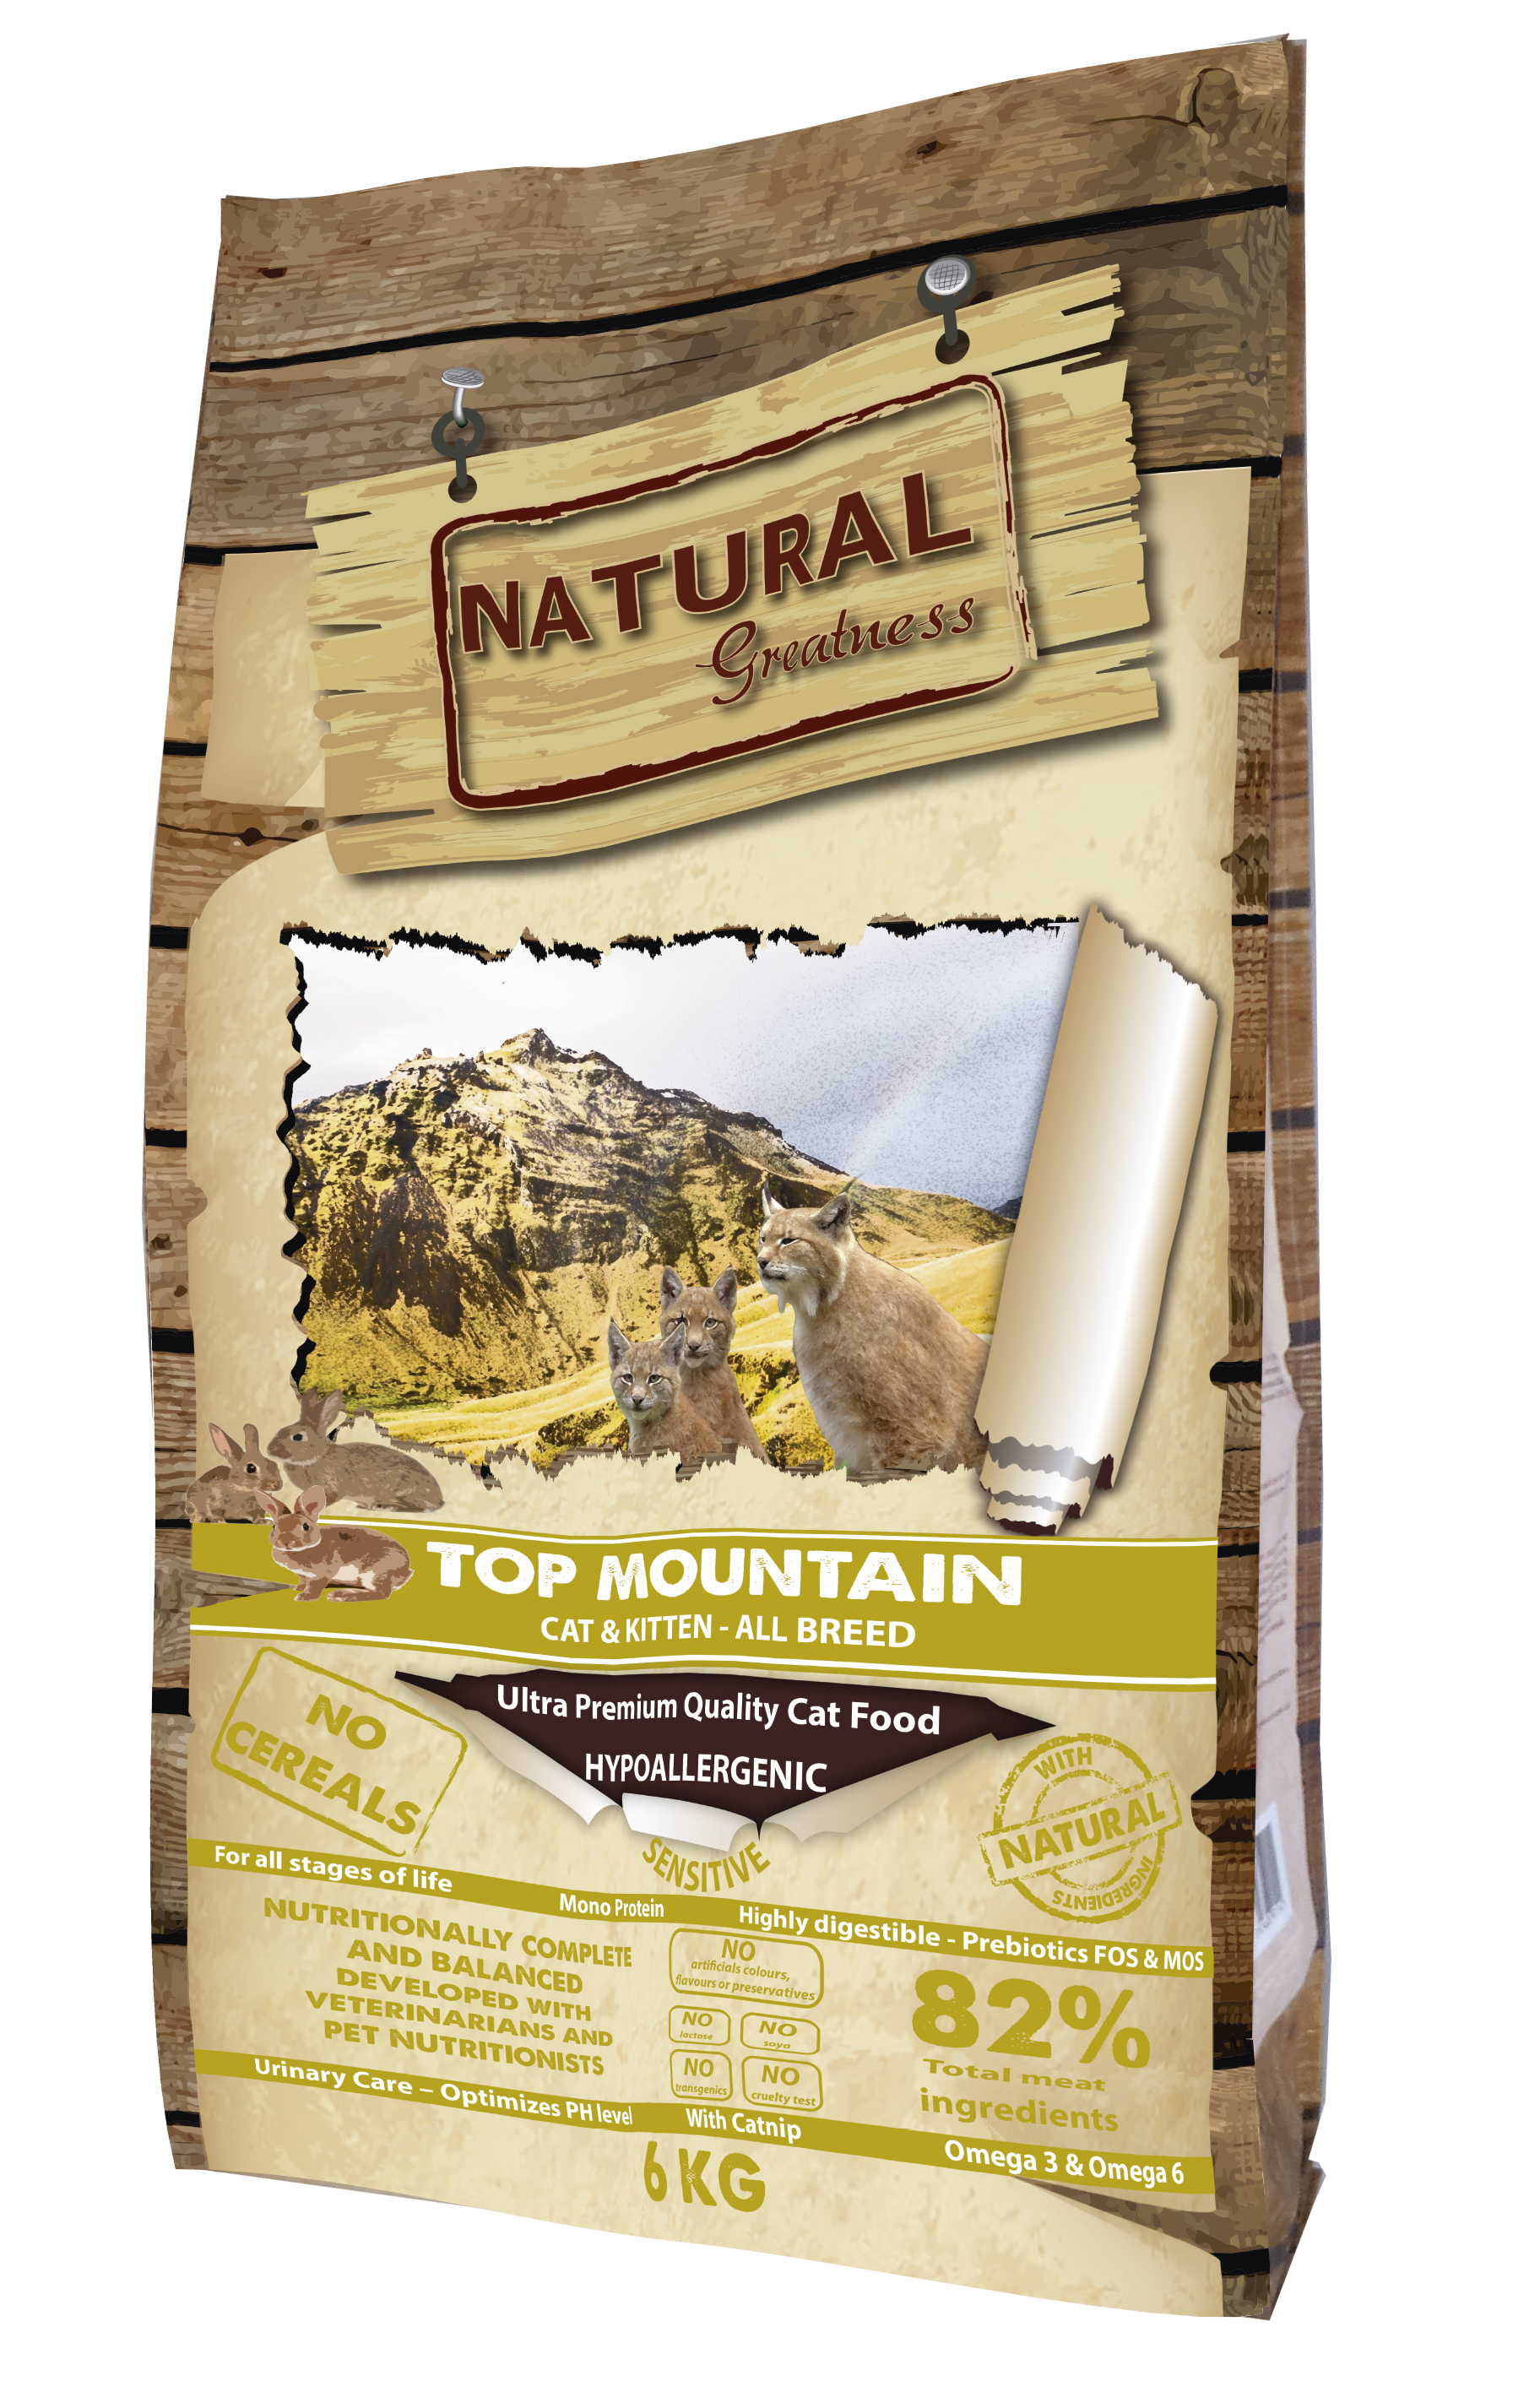 Natural Greatness Cat Top Mountain 6kg - Chrysdietetic